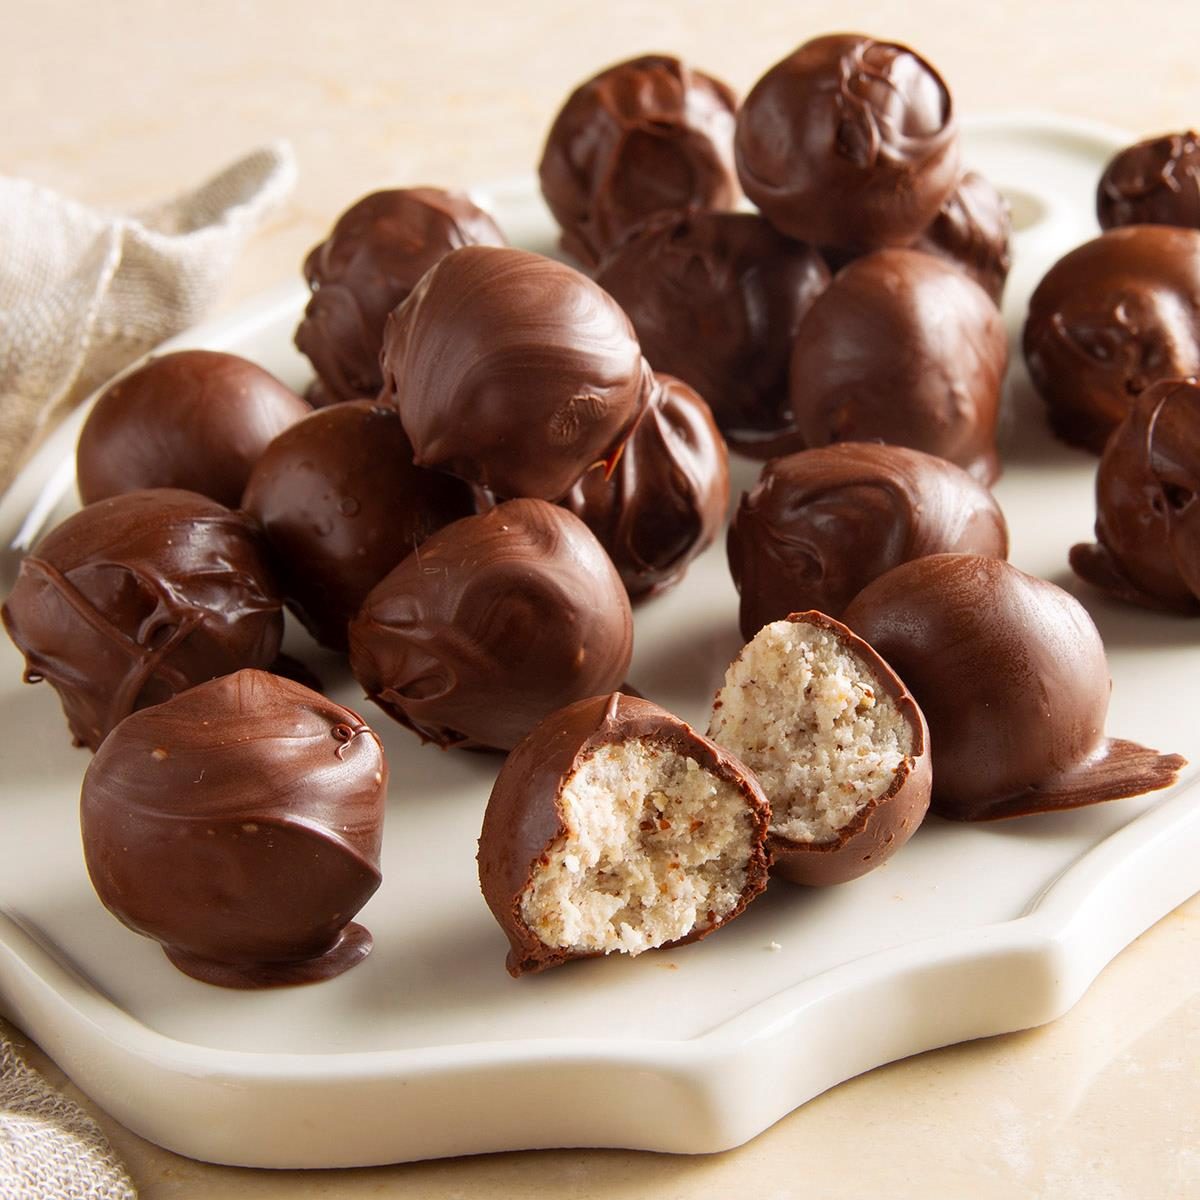 17 Easy Chocolate Candy Recipes That You'll Want to Make in Bulk